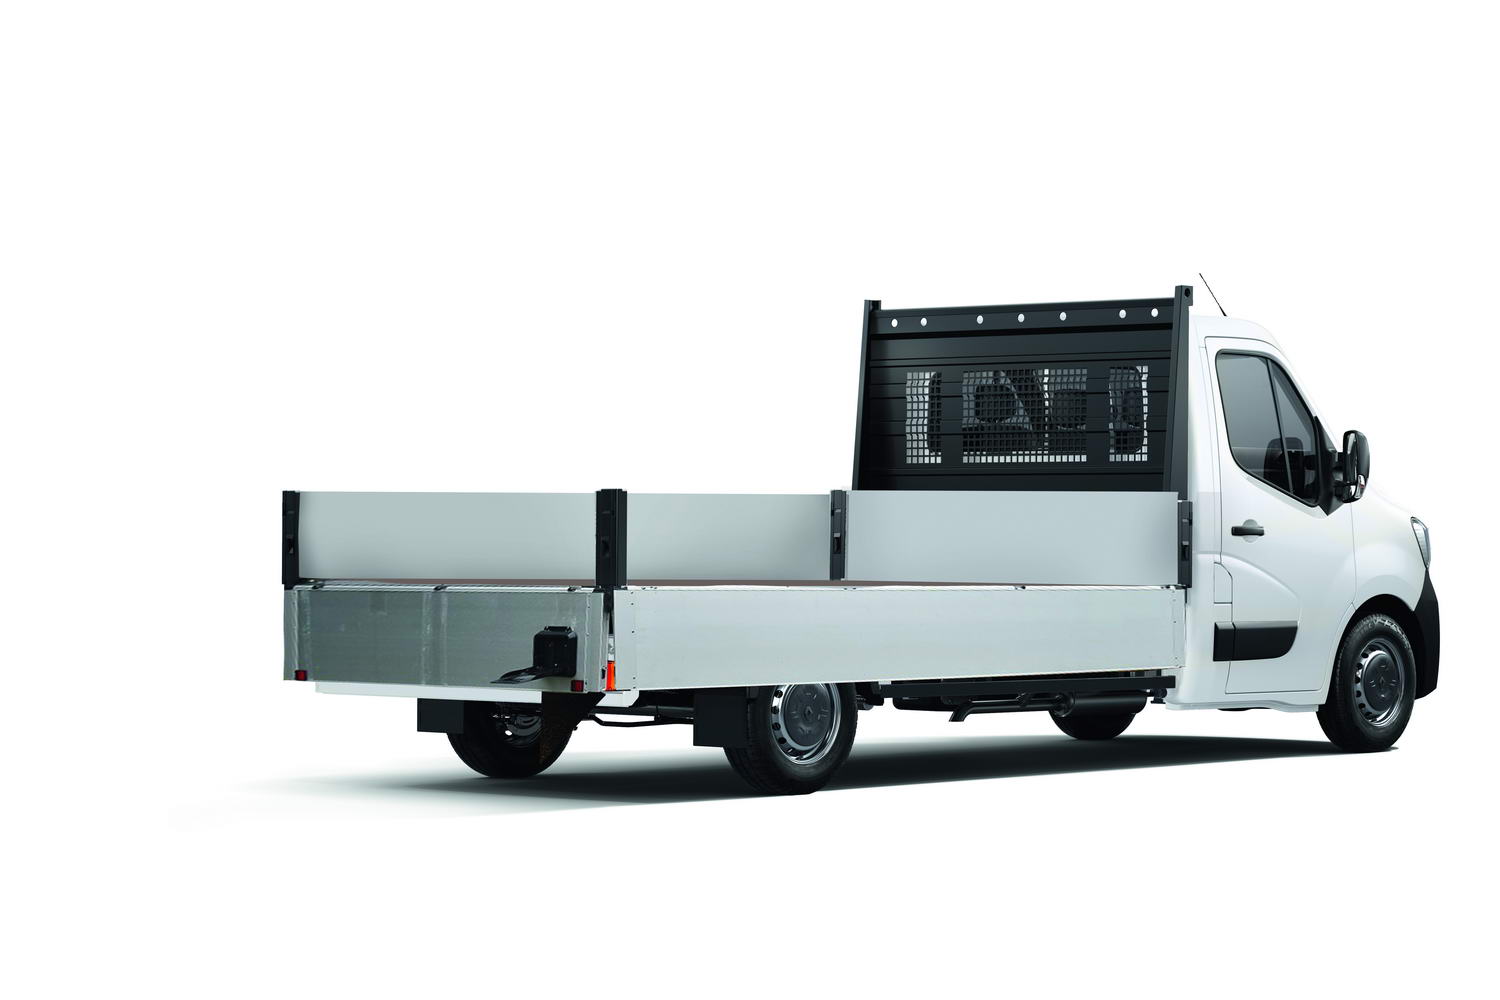 Rear view of the Dropside with two panels hinged down.